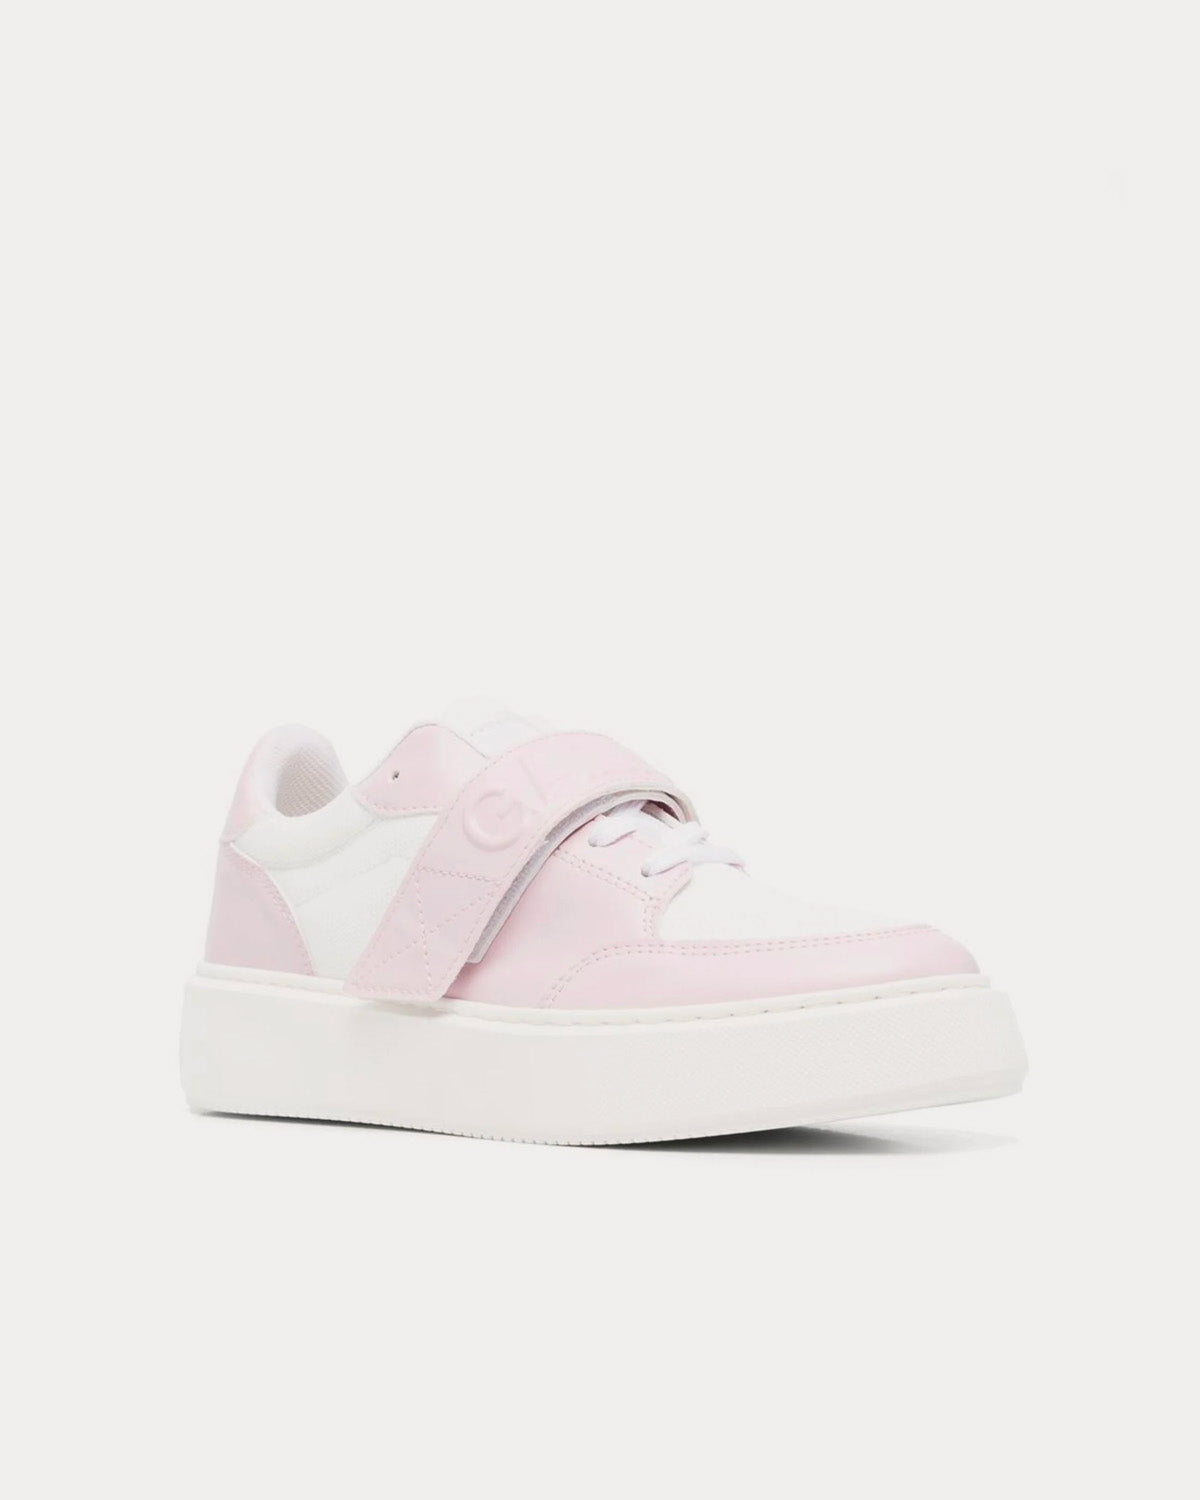 Ganni - Sporty Cupsole Pink / White Low Top Sneakers